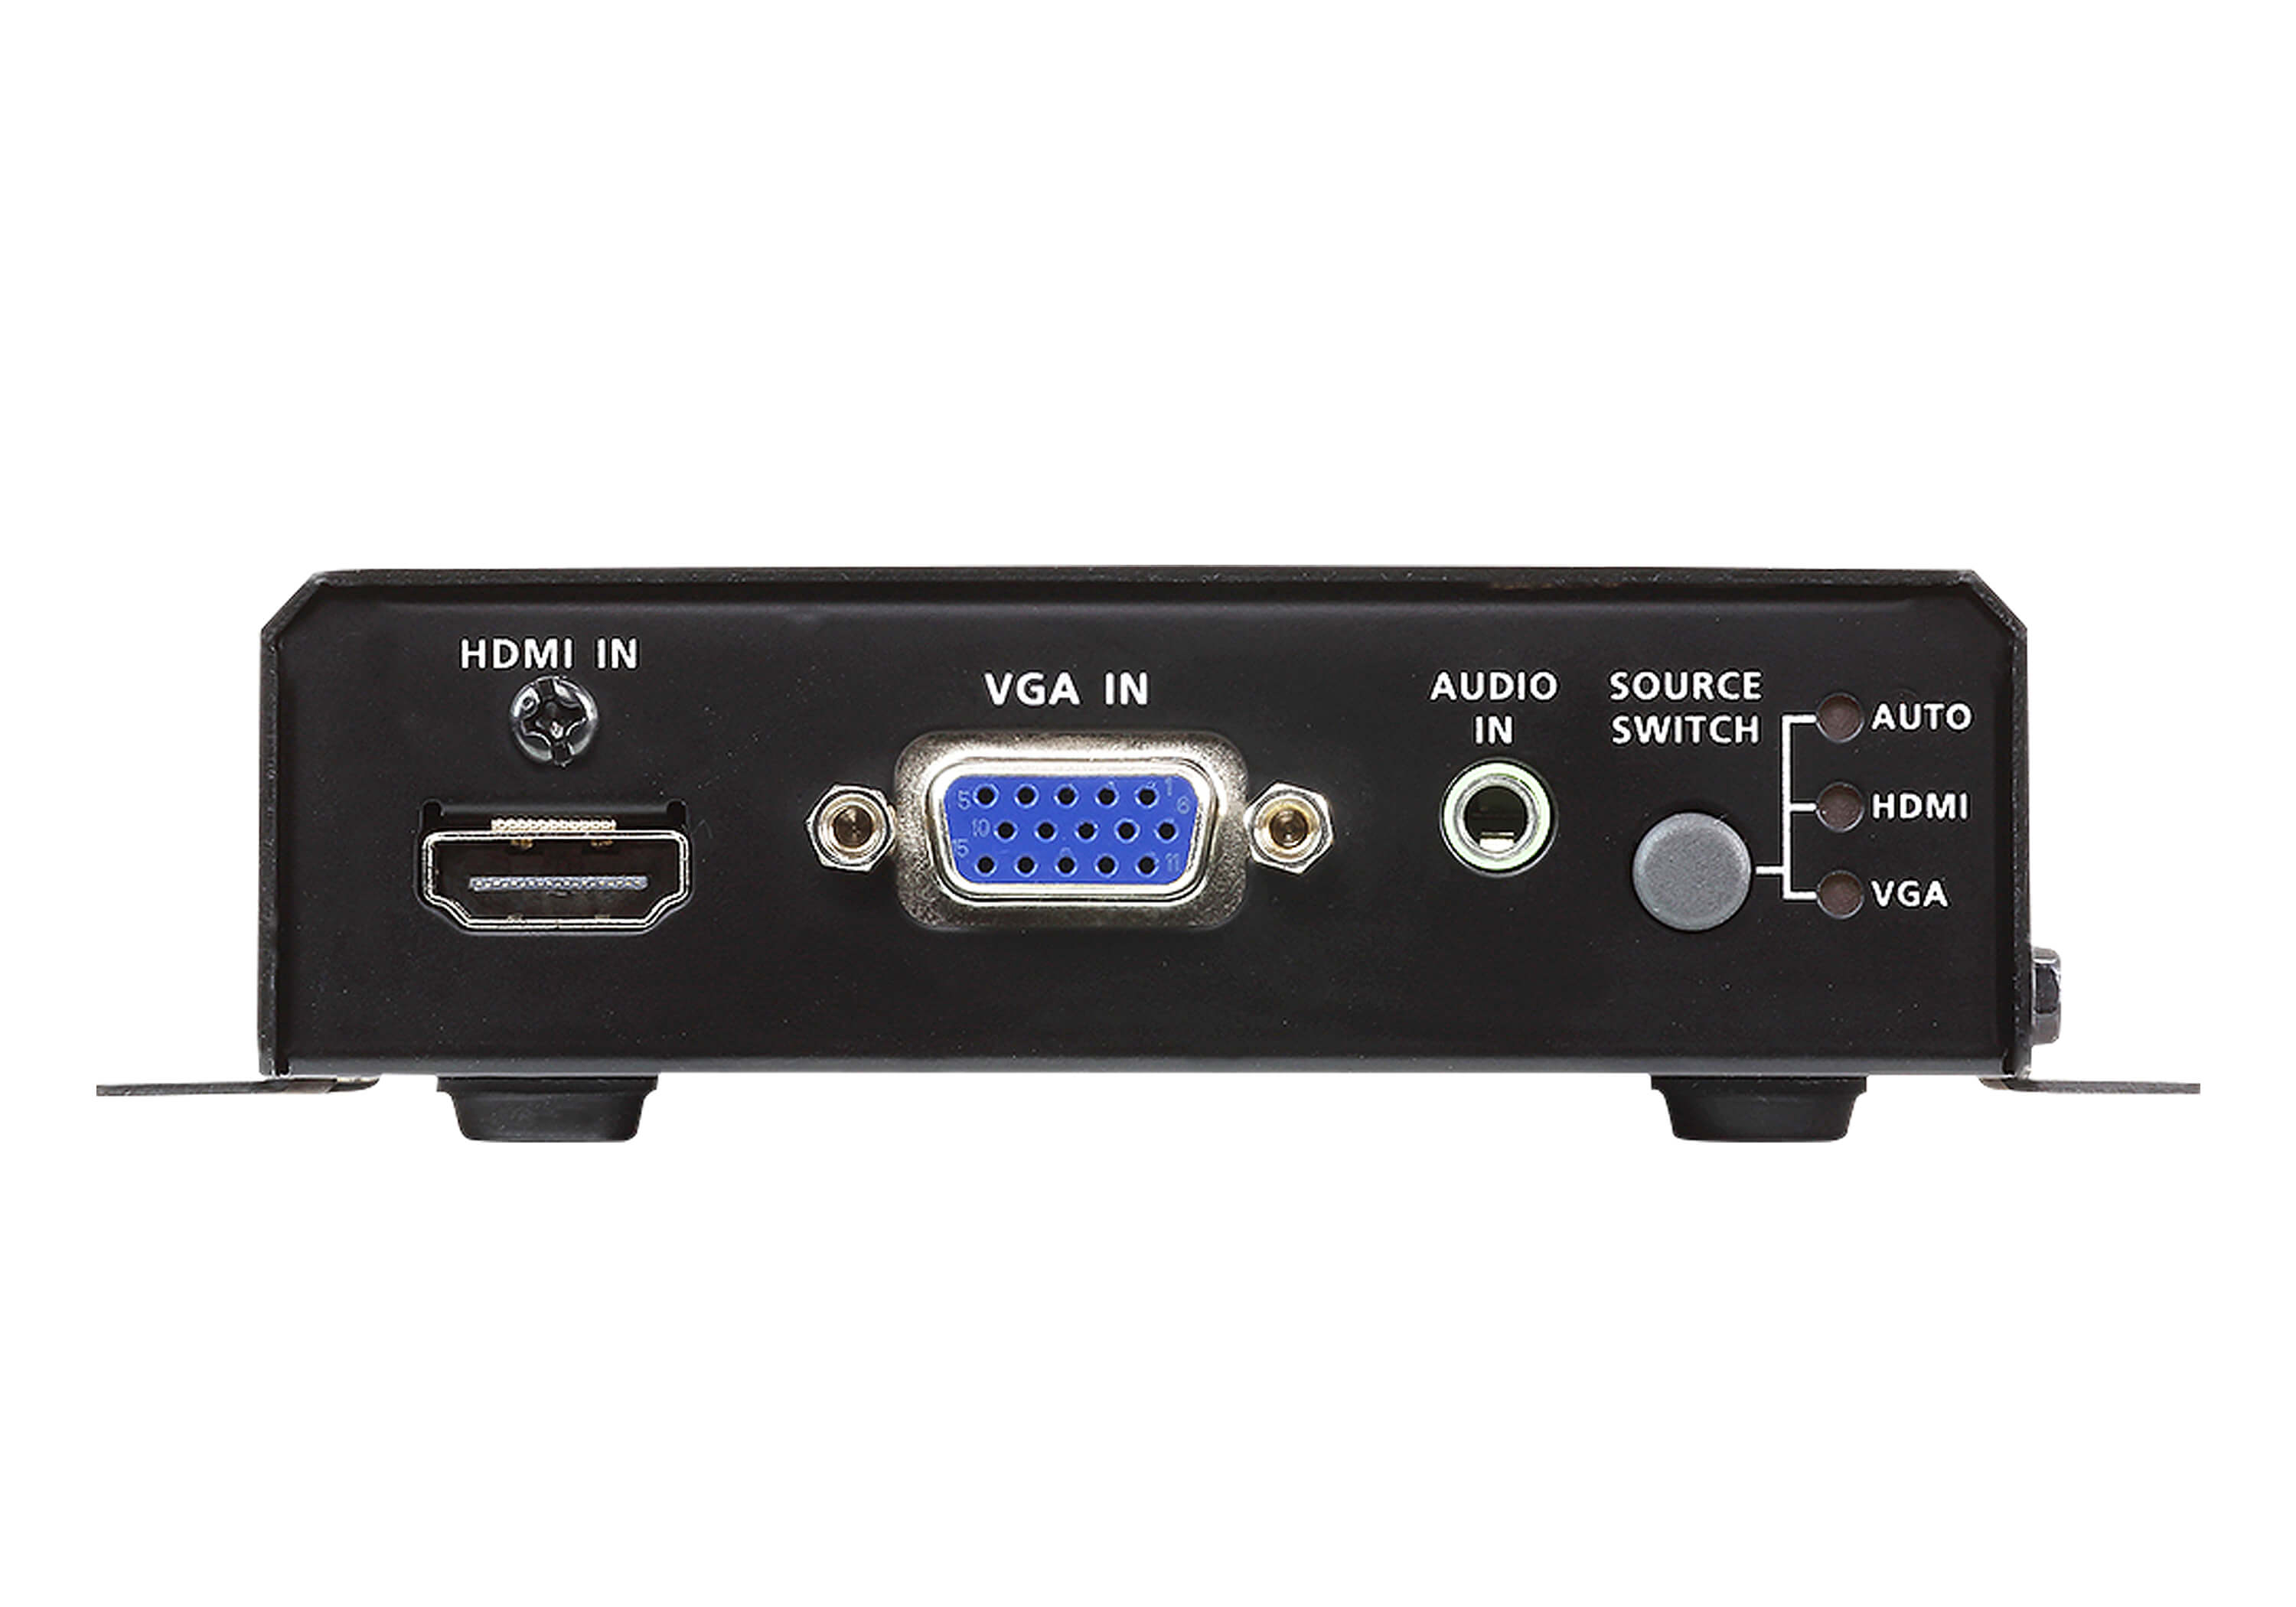 Aten HDMI & VGA HDBaseT Transmitter with POH (4K@100m) (HDBaseT Class A) (PoH PD) -VE2812AT (3 Year Manufacture Local Warranty In Singapore)